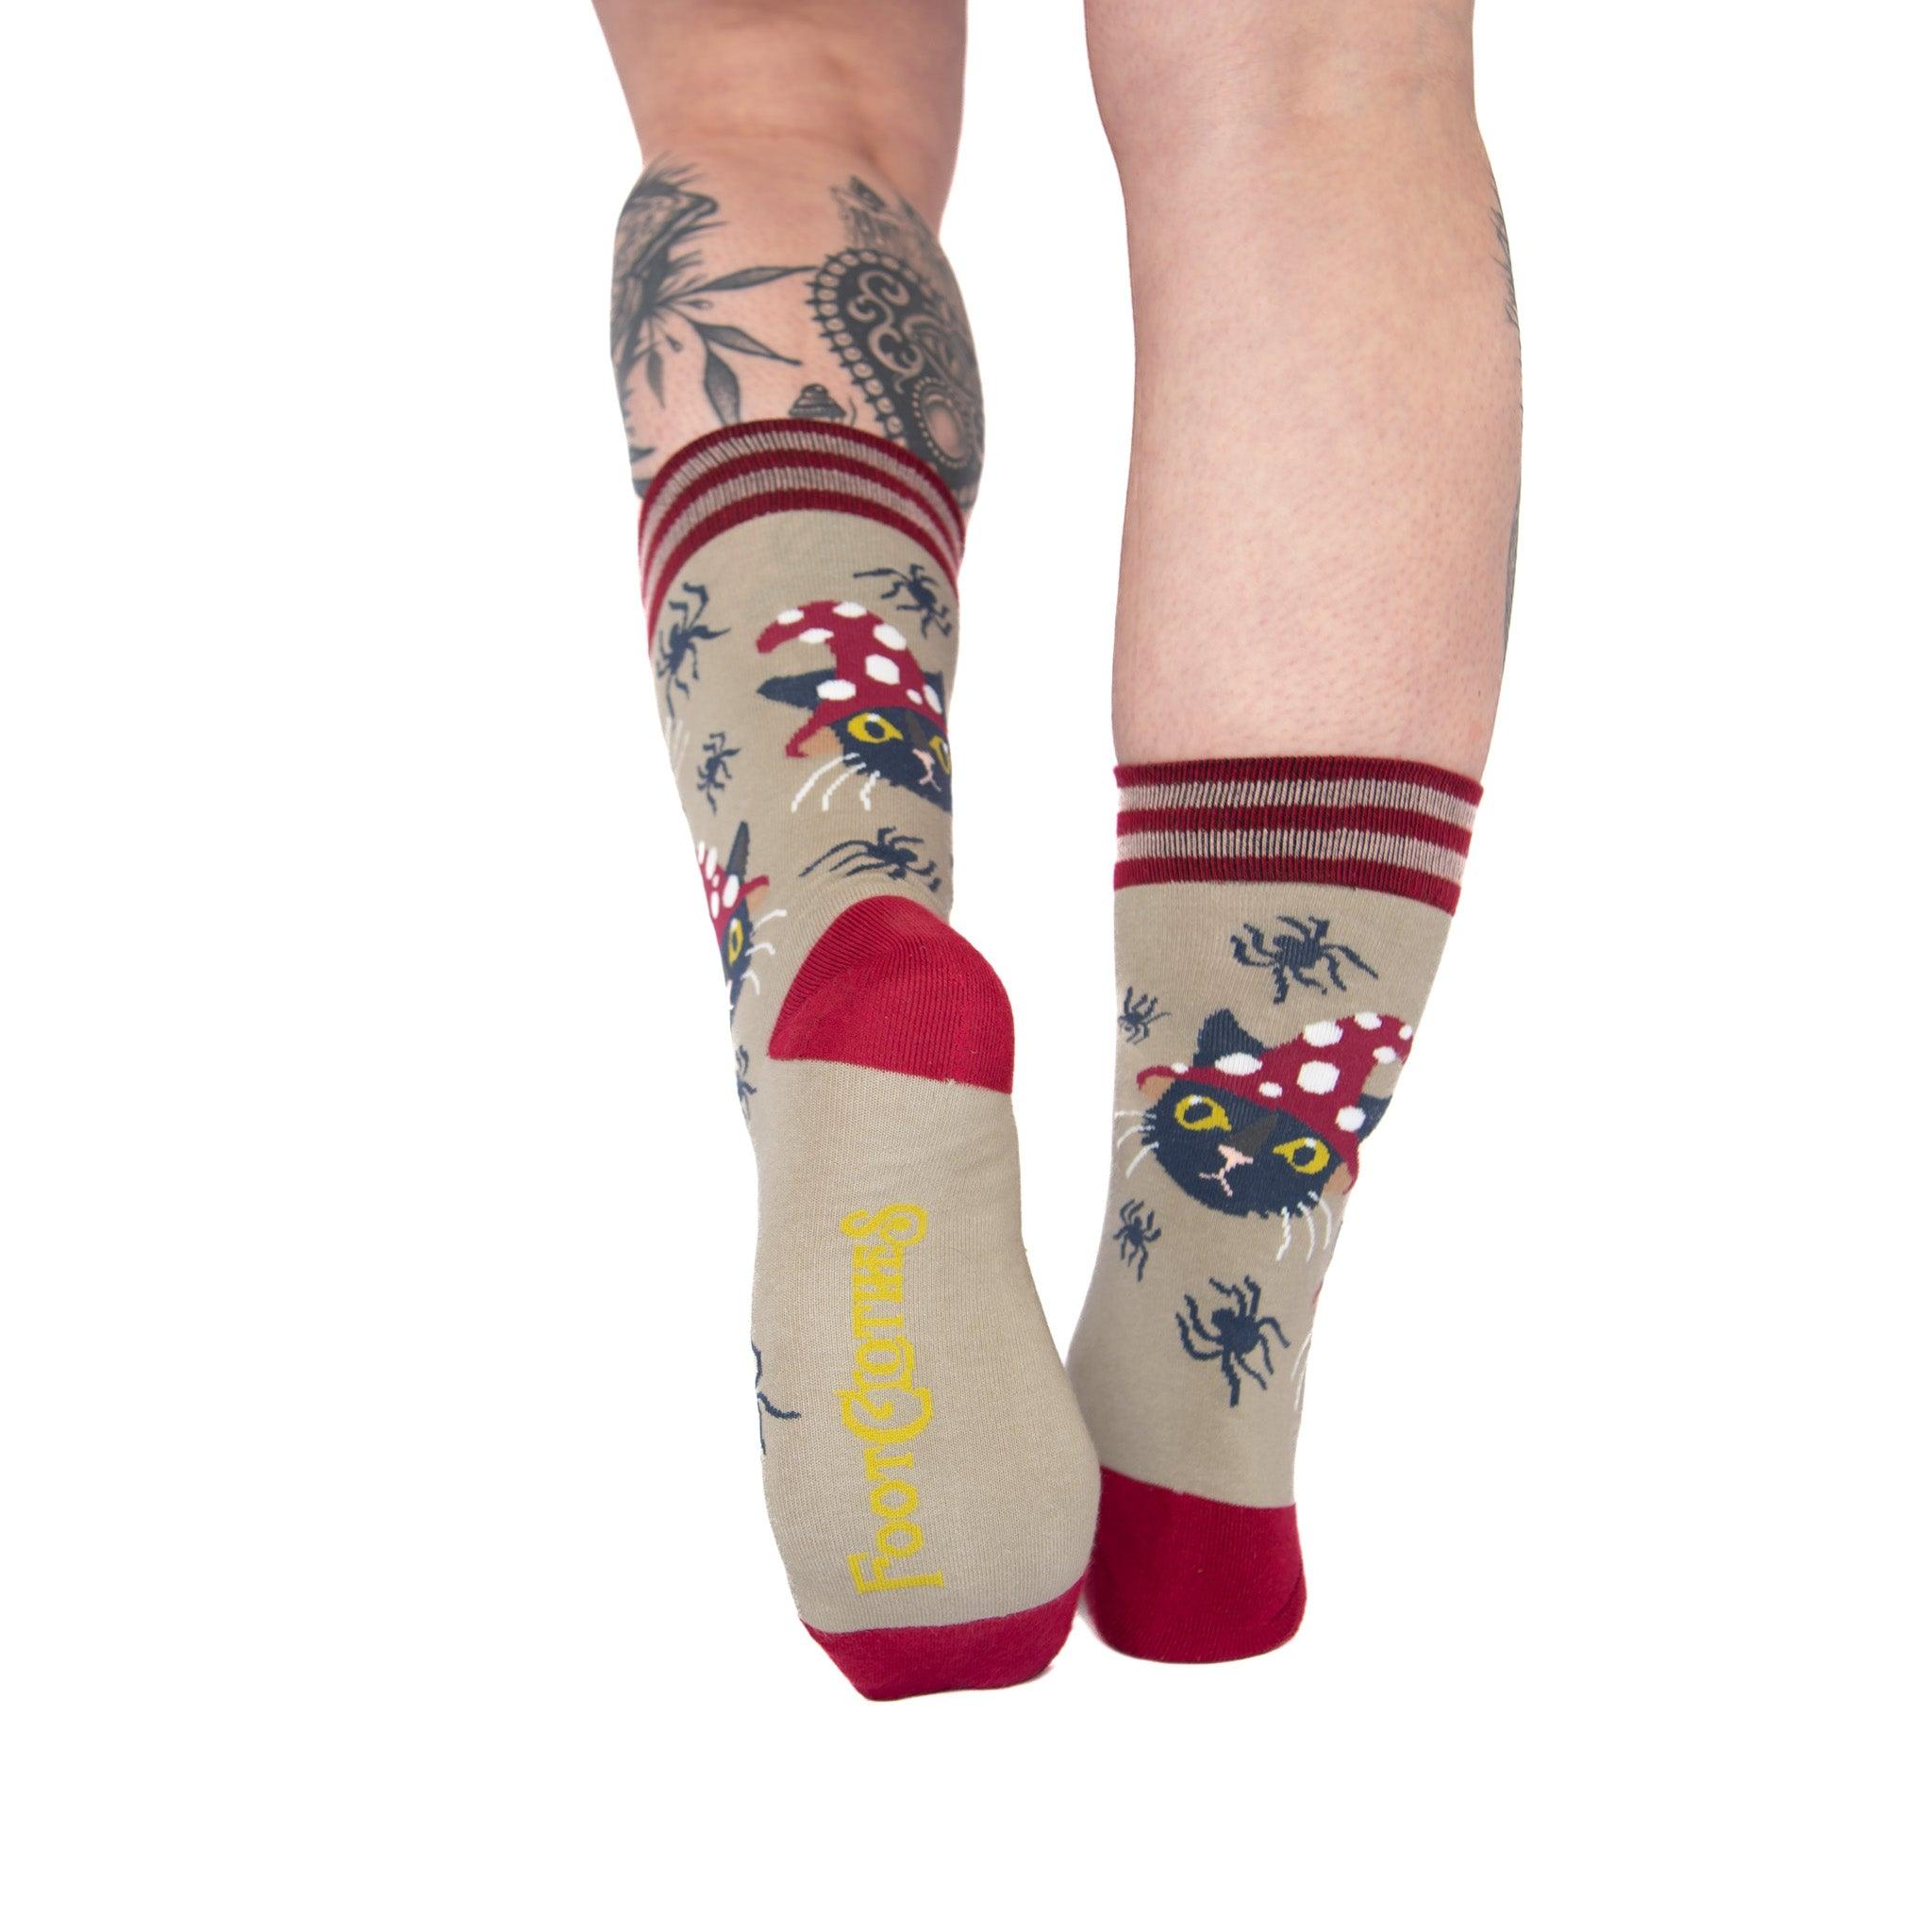 Witchy Whiskers Crew Socks - FootClothes